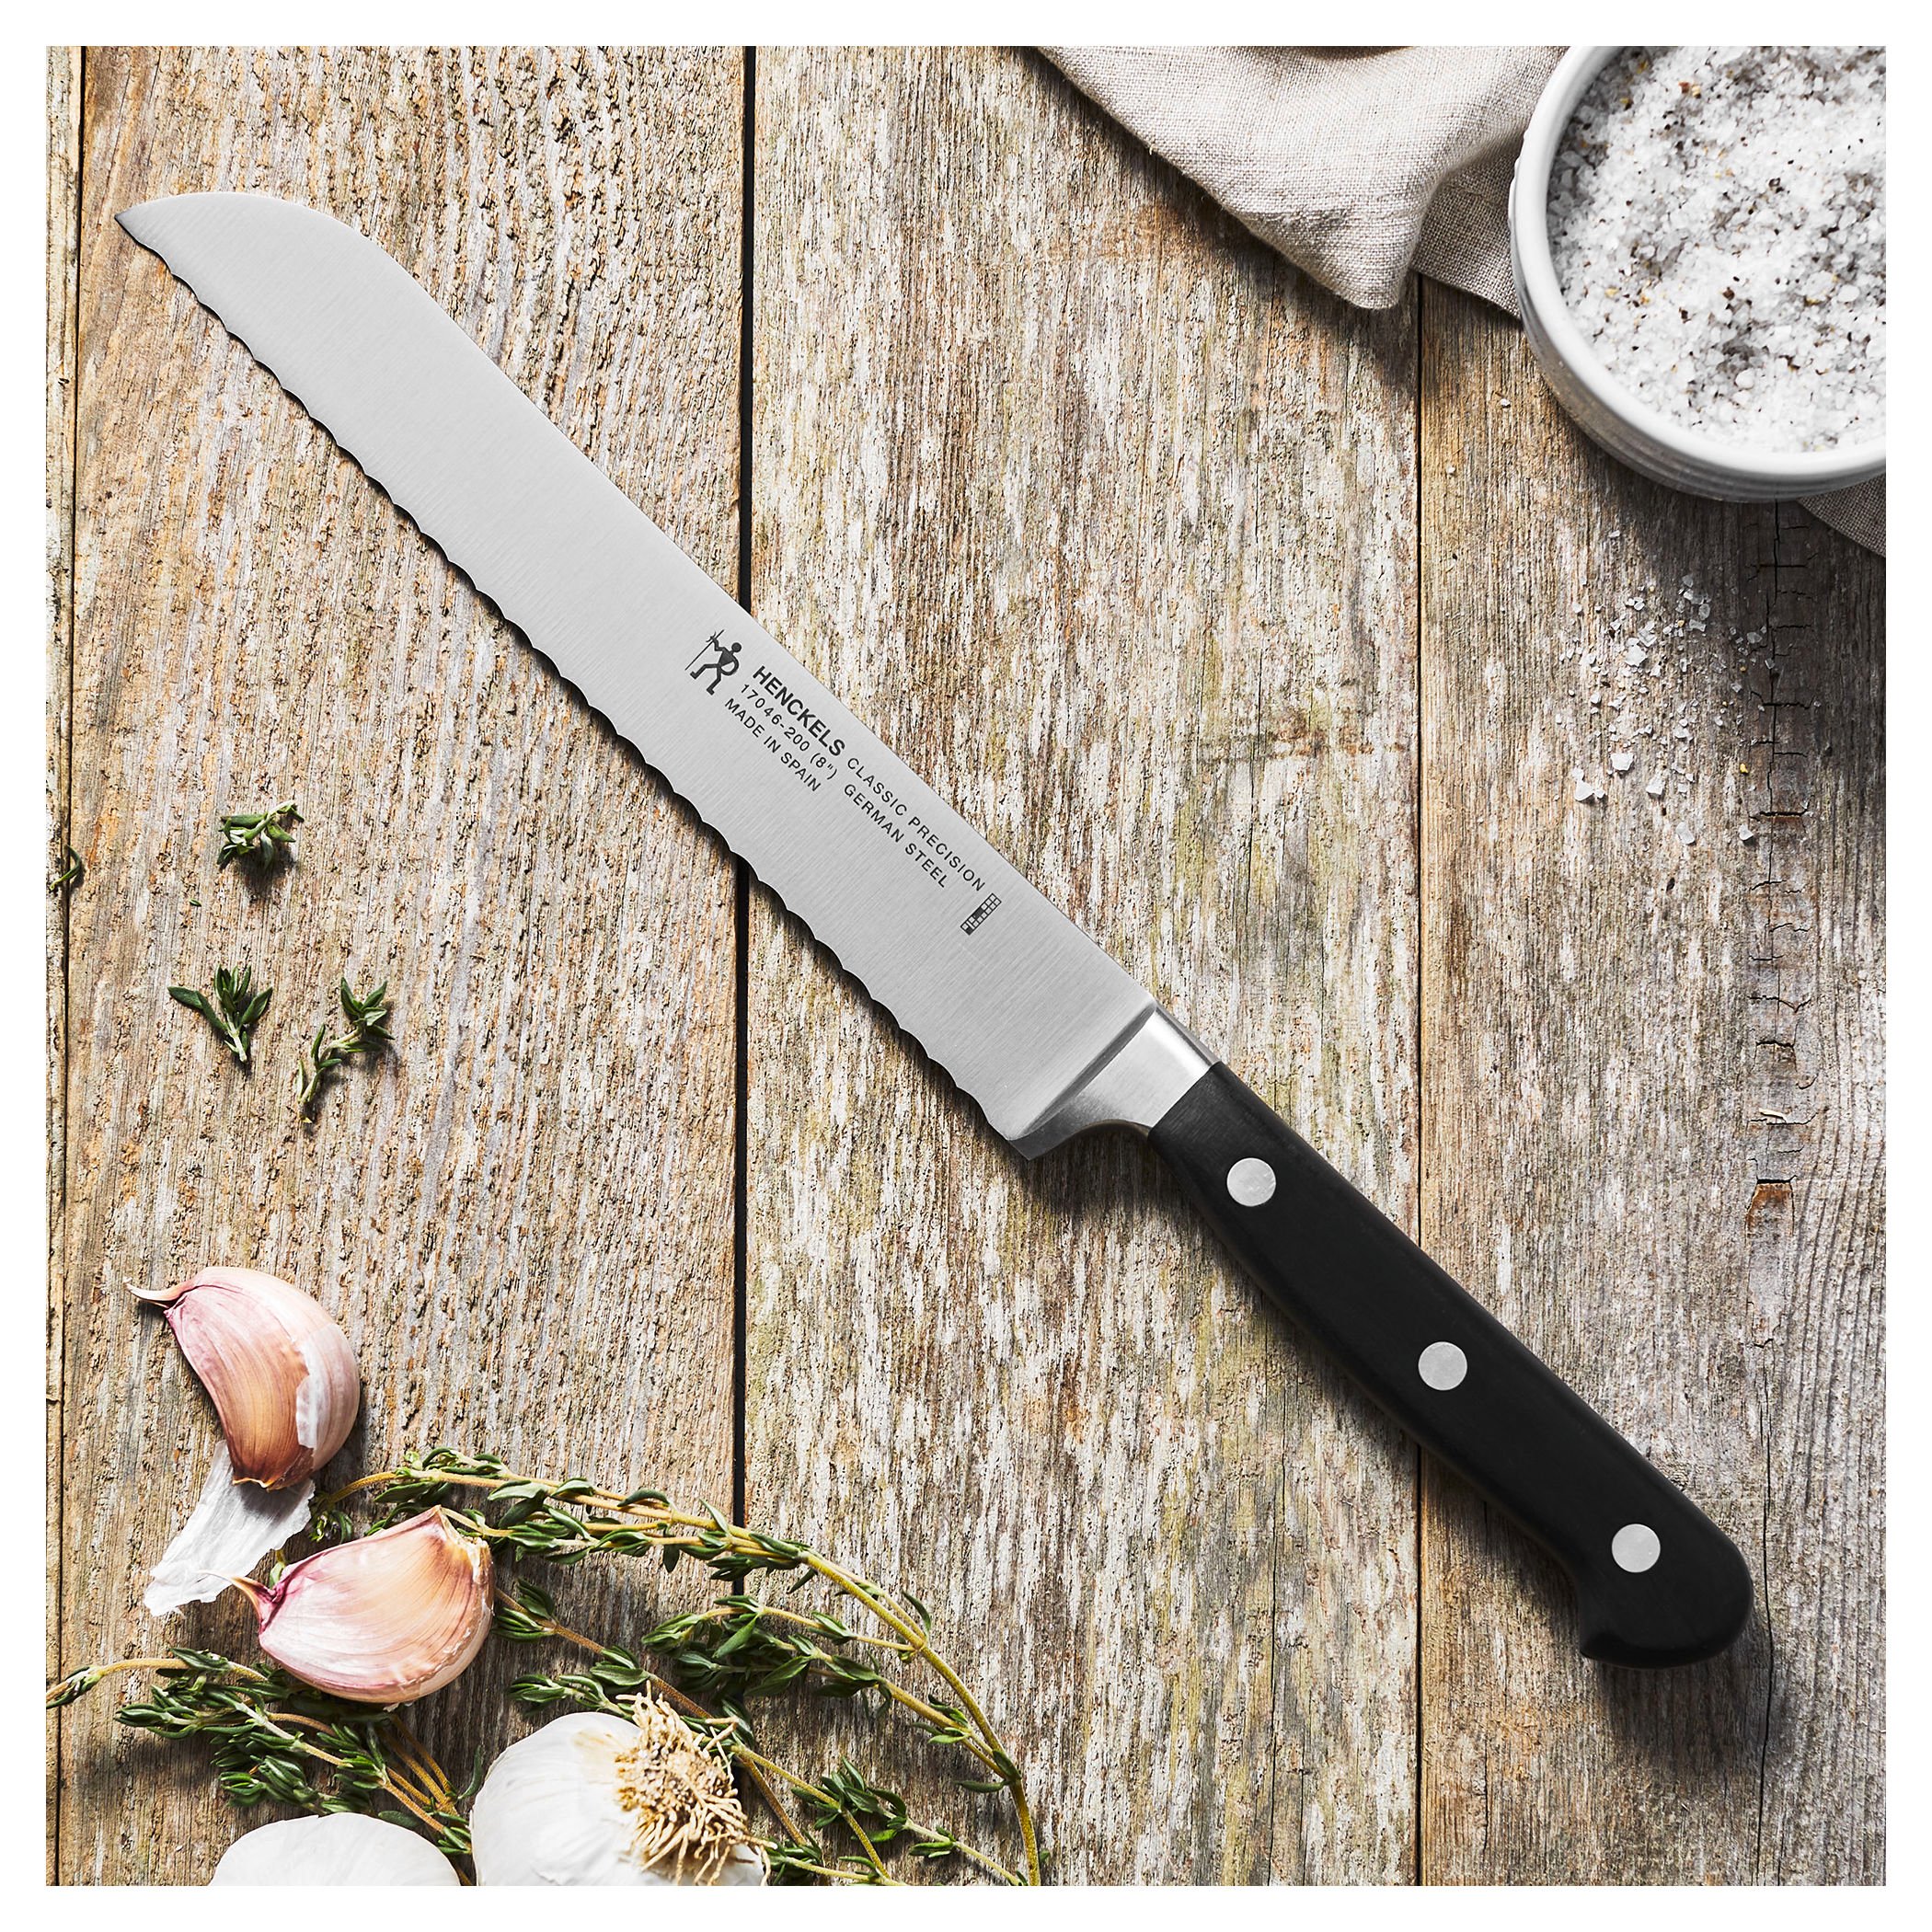 ZWILLING Gourmet 10-inch, Bread / Pastry Knife